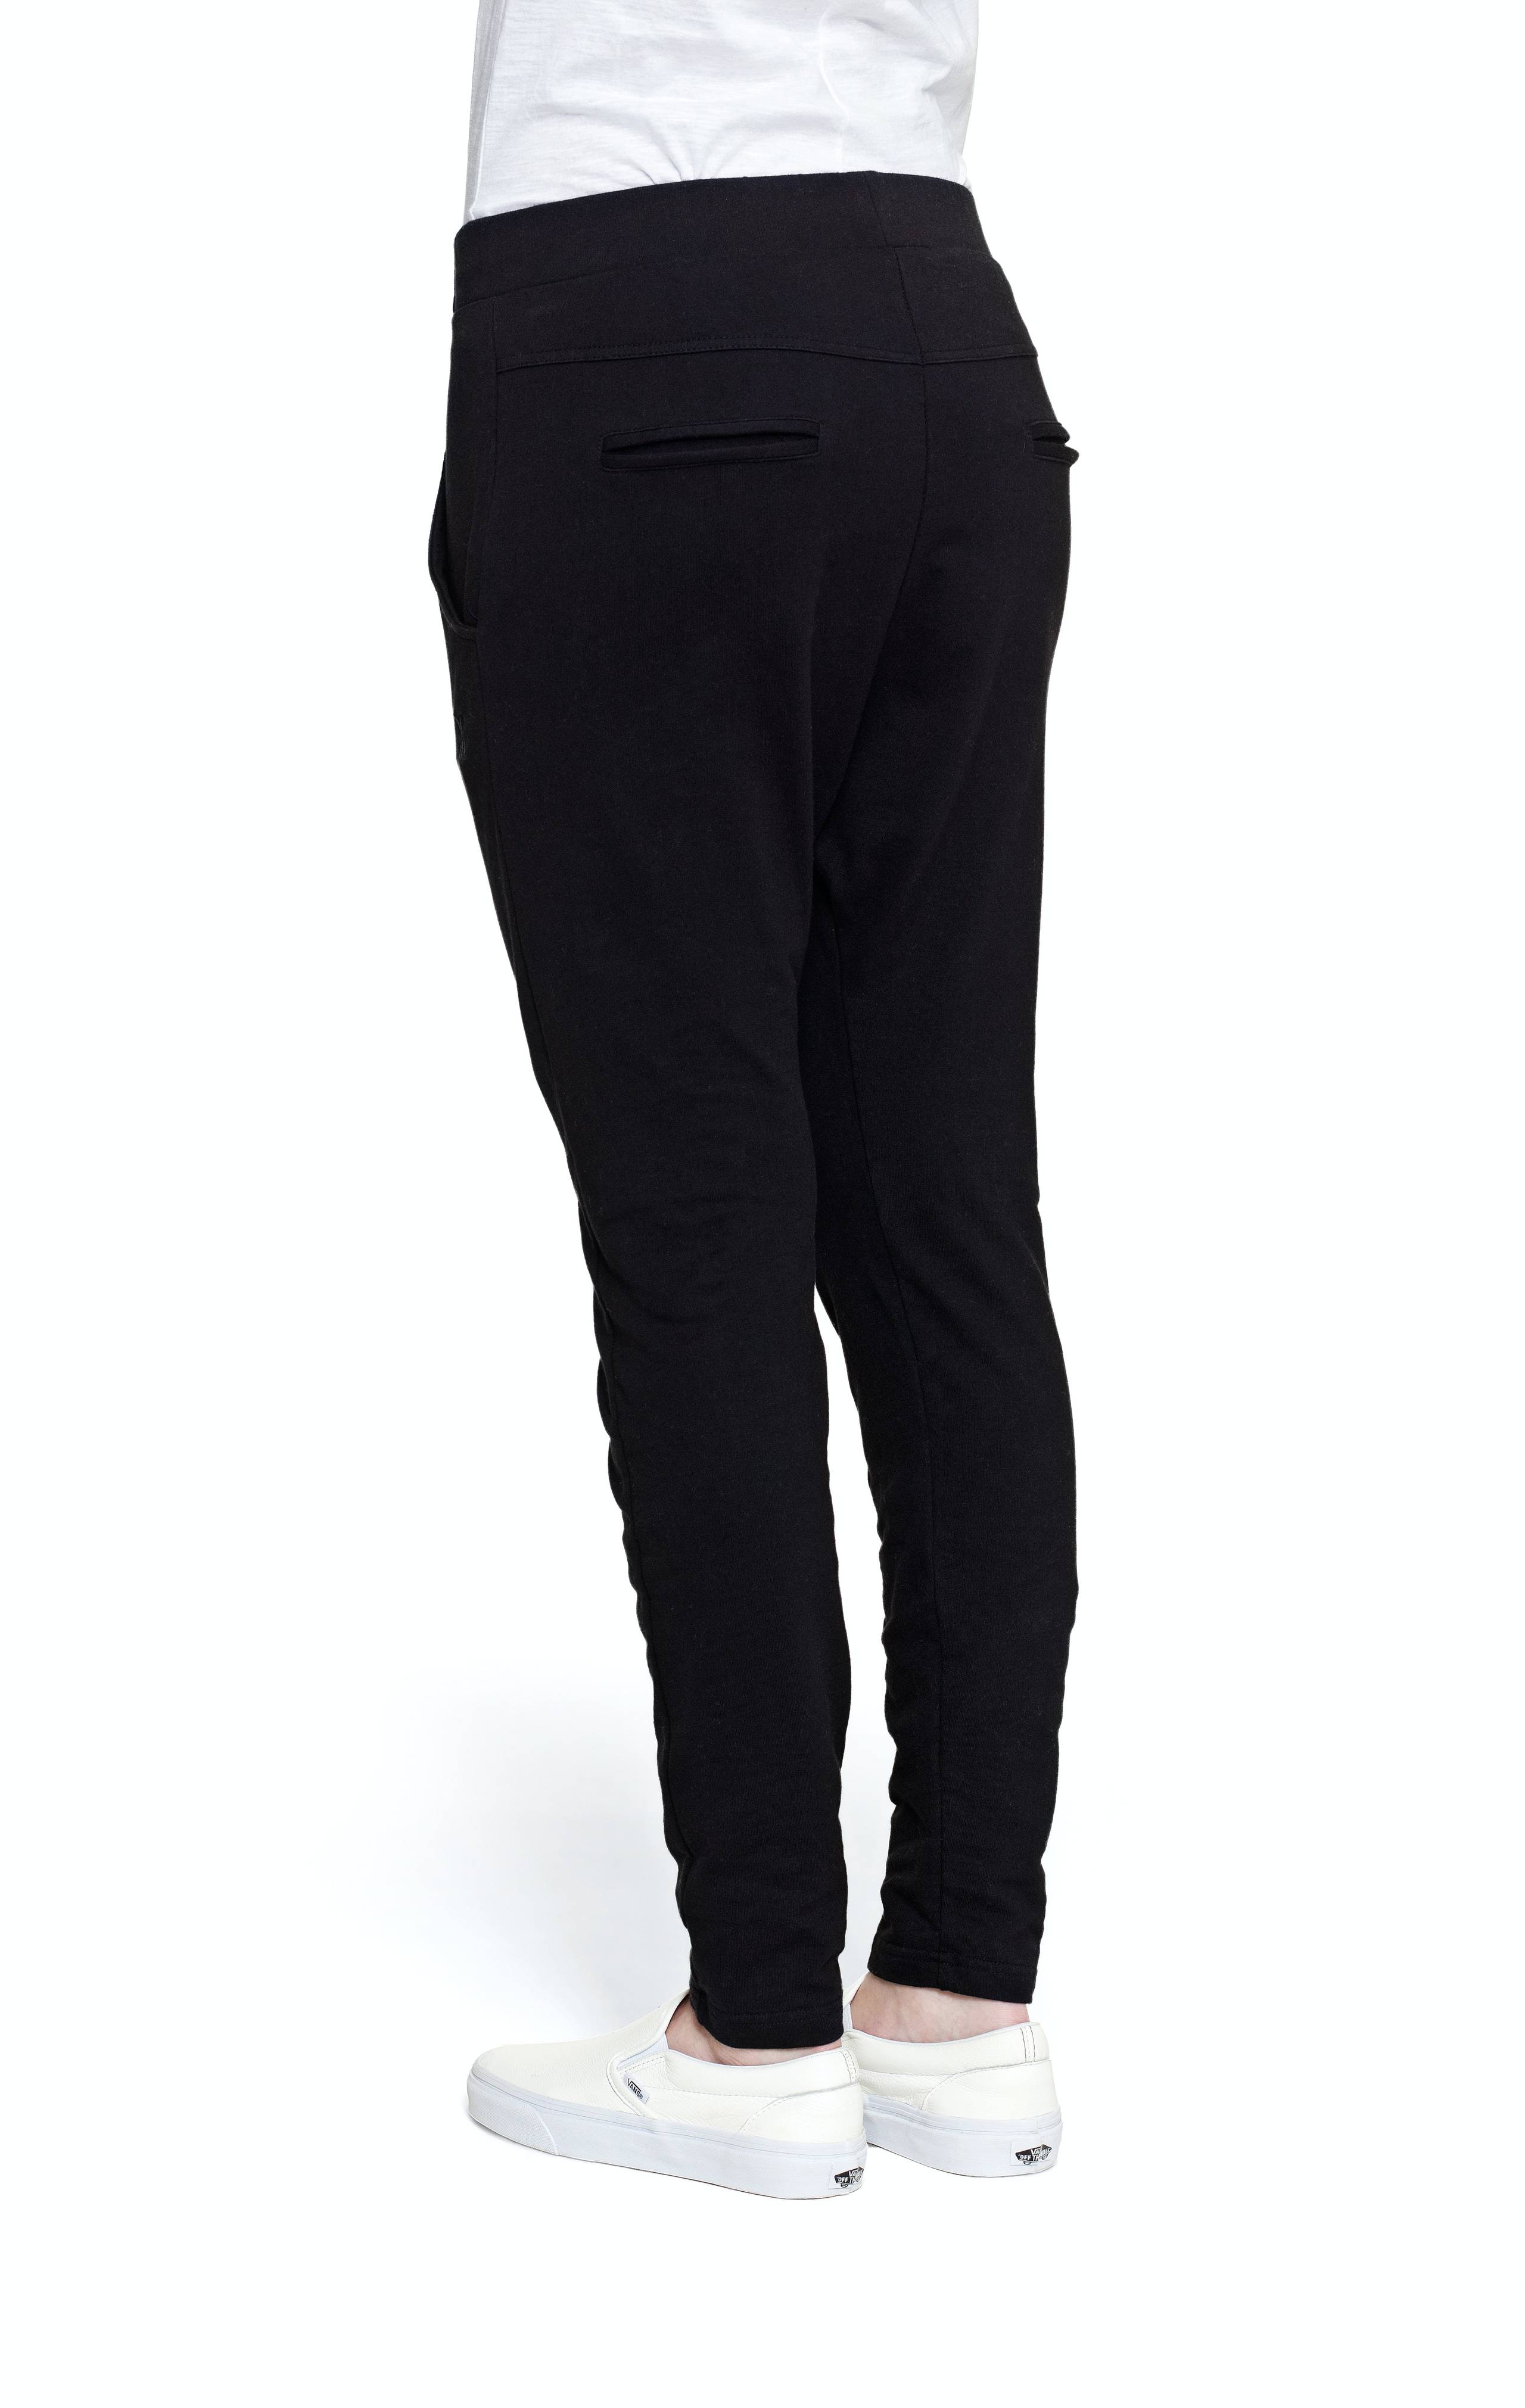 Onepiece Whatever Pants Black - 4